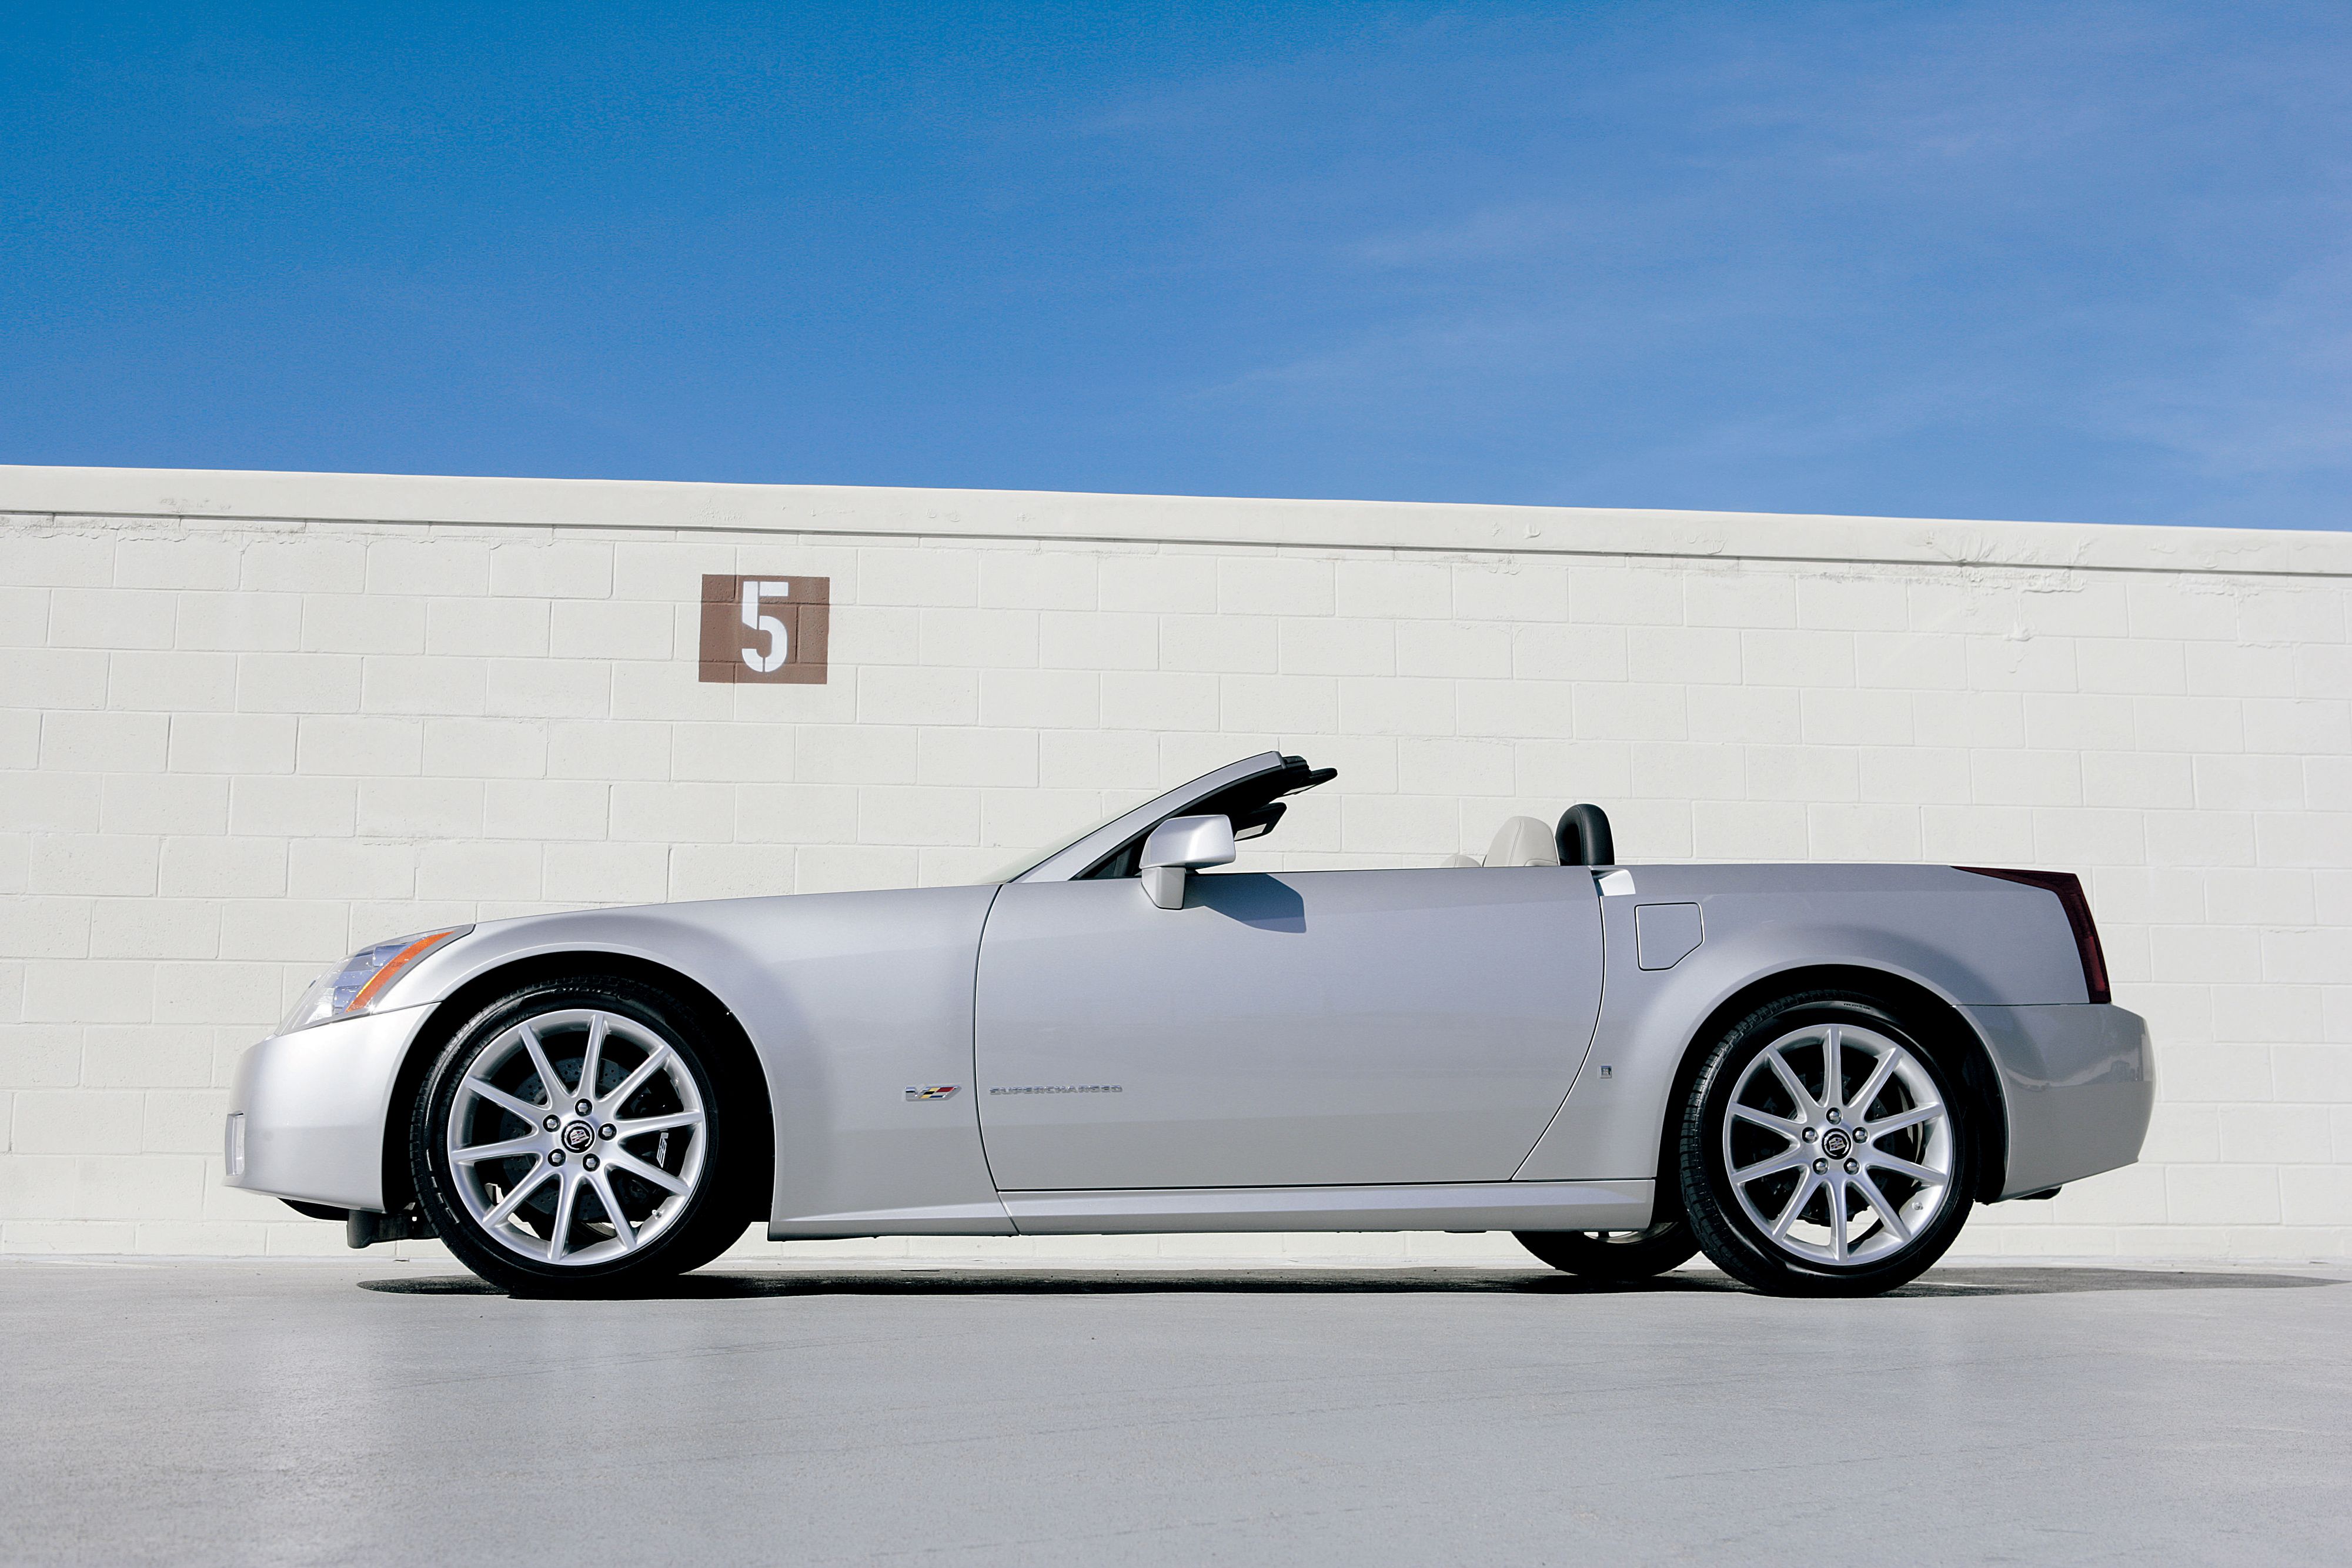 Tested: 2006 Cadillac XLR-V Leverages Sophisticated Performance